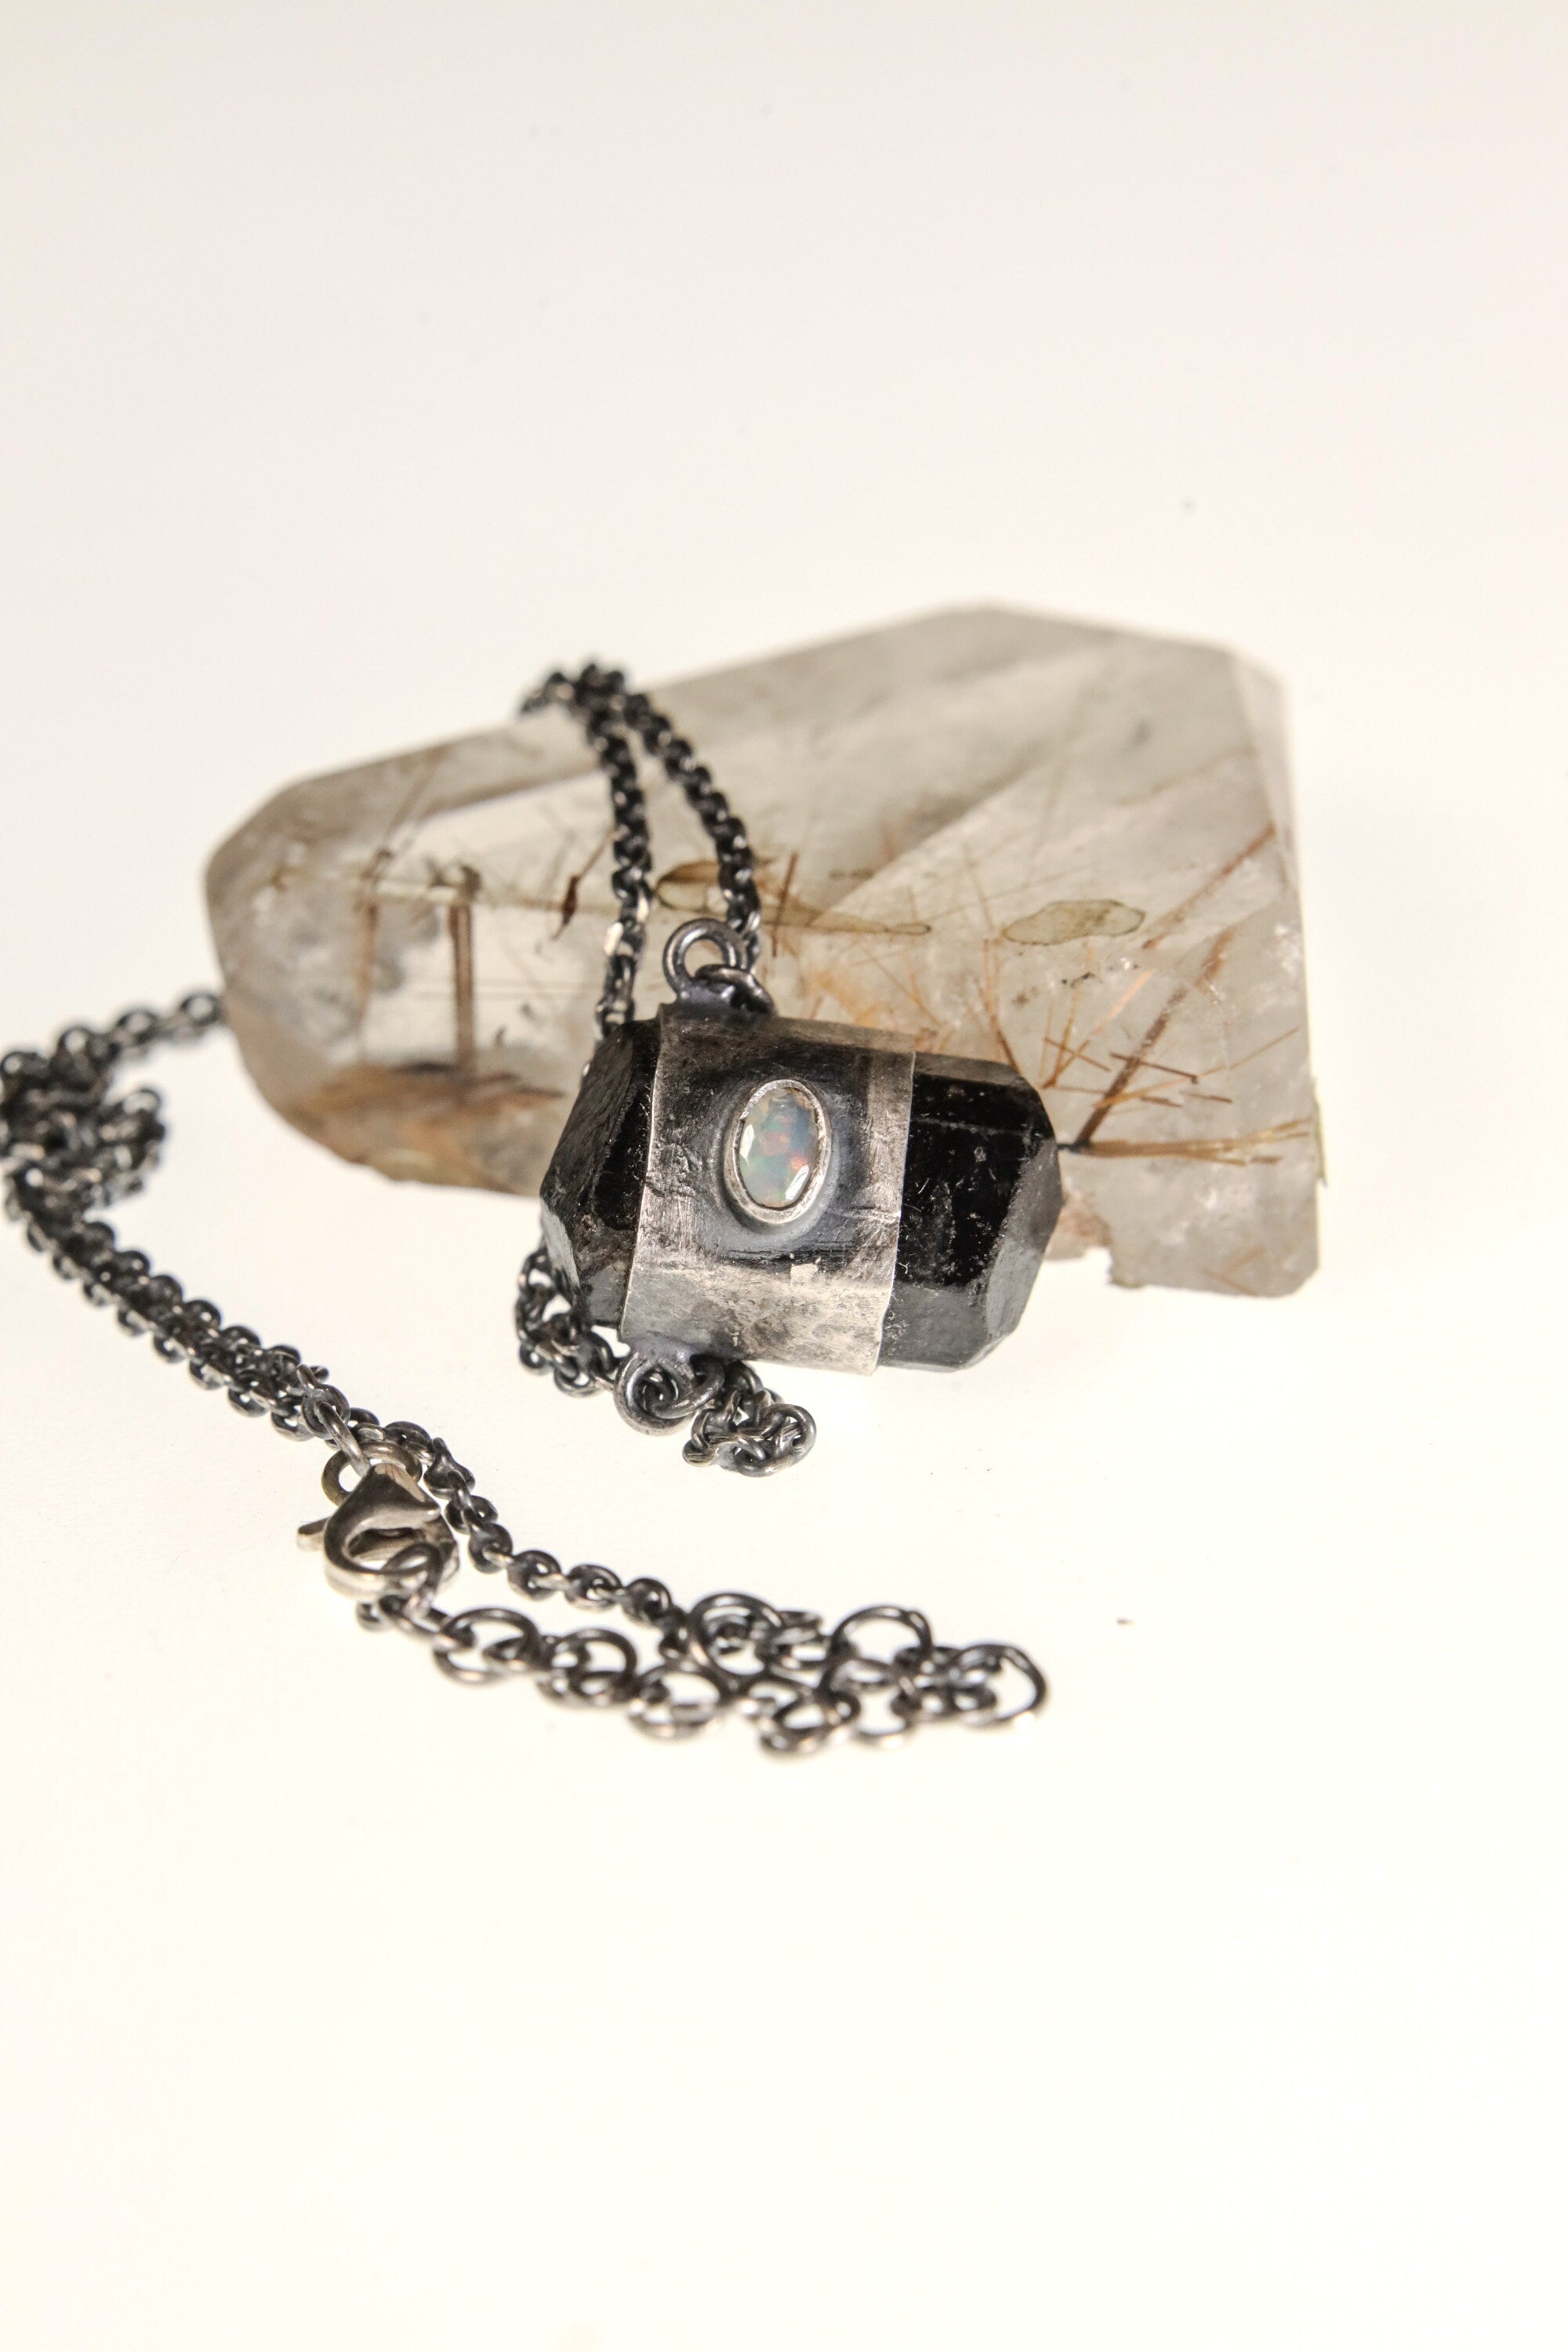 Celestial Equilibrium: Double Terminated Brown Tourmaline, Ethiopian Opal, and Blue Moonstone - Sterling Silver Crystal Pendant - NO/02